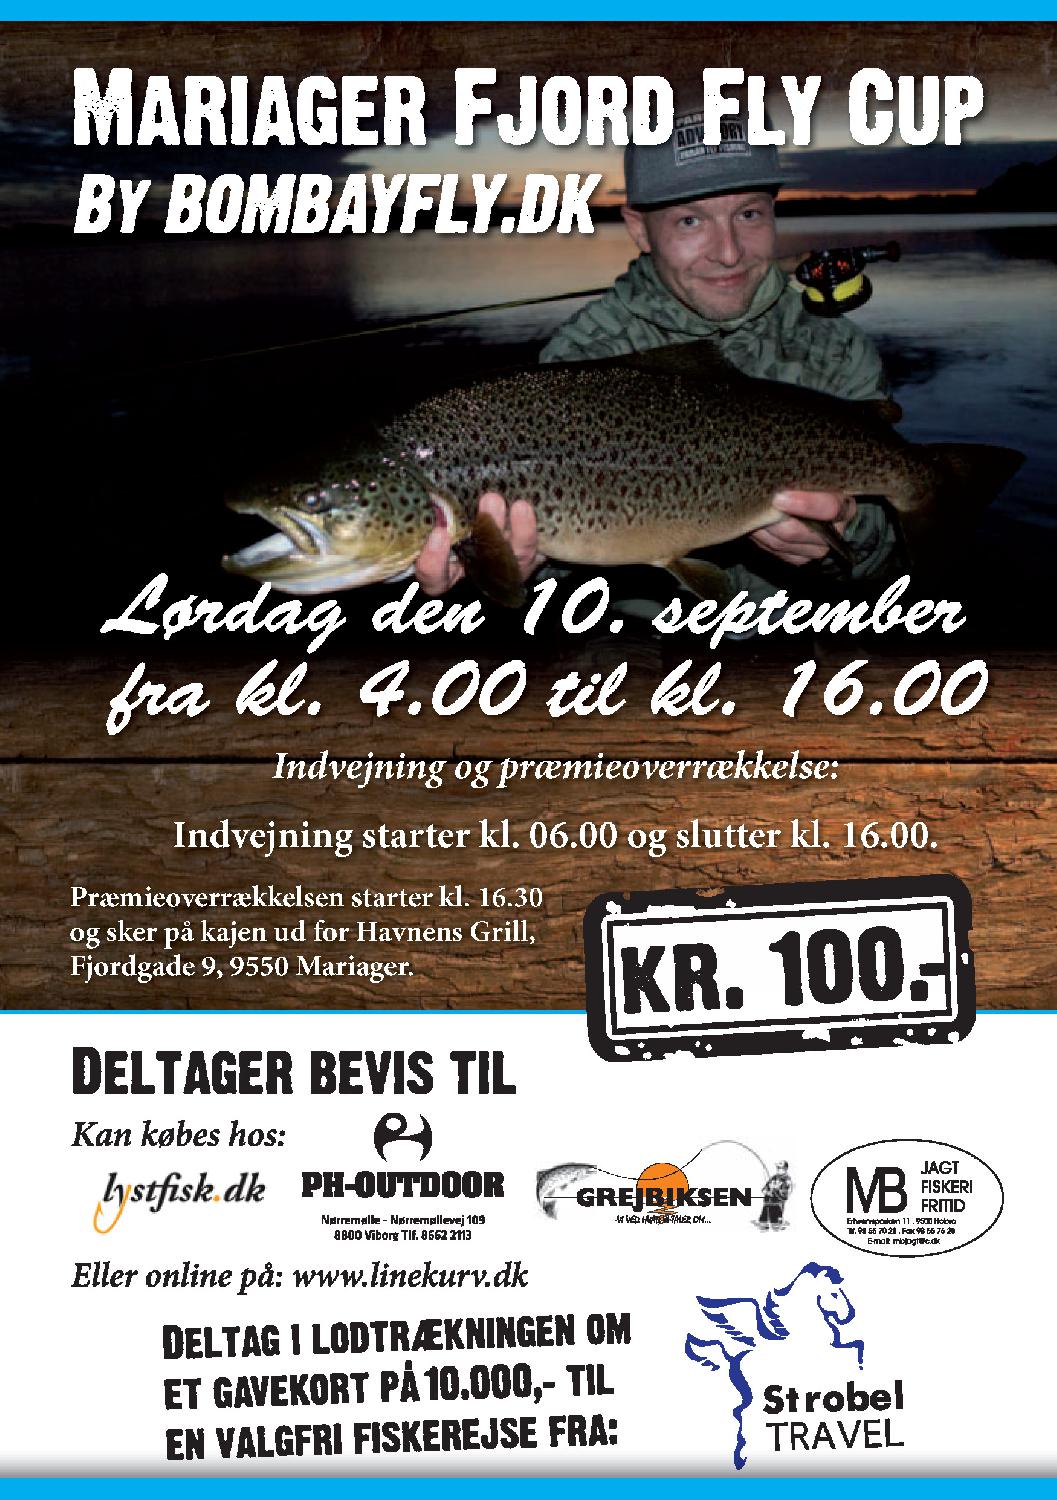 Mariager Fjord Fly Cup 10. september